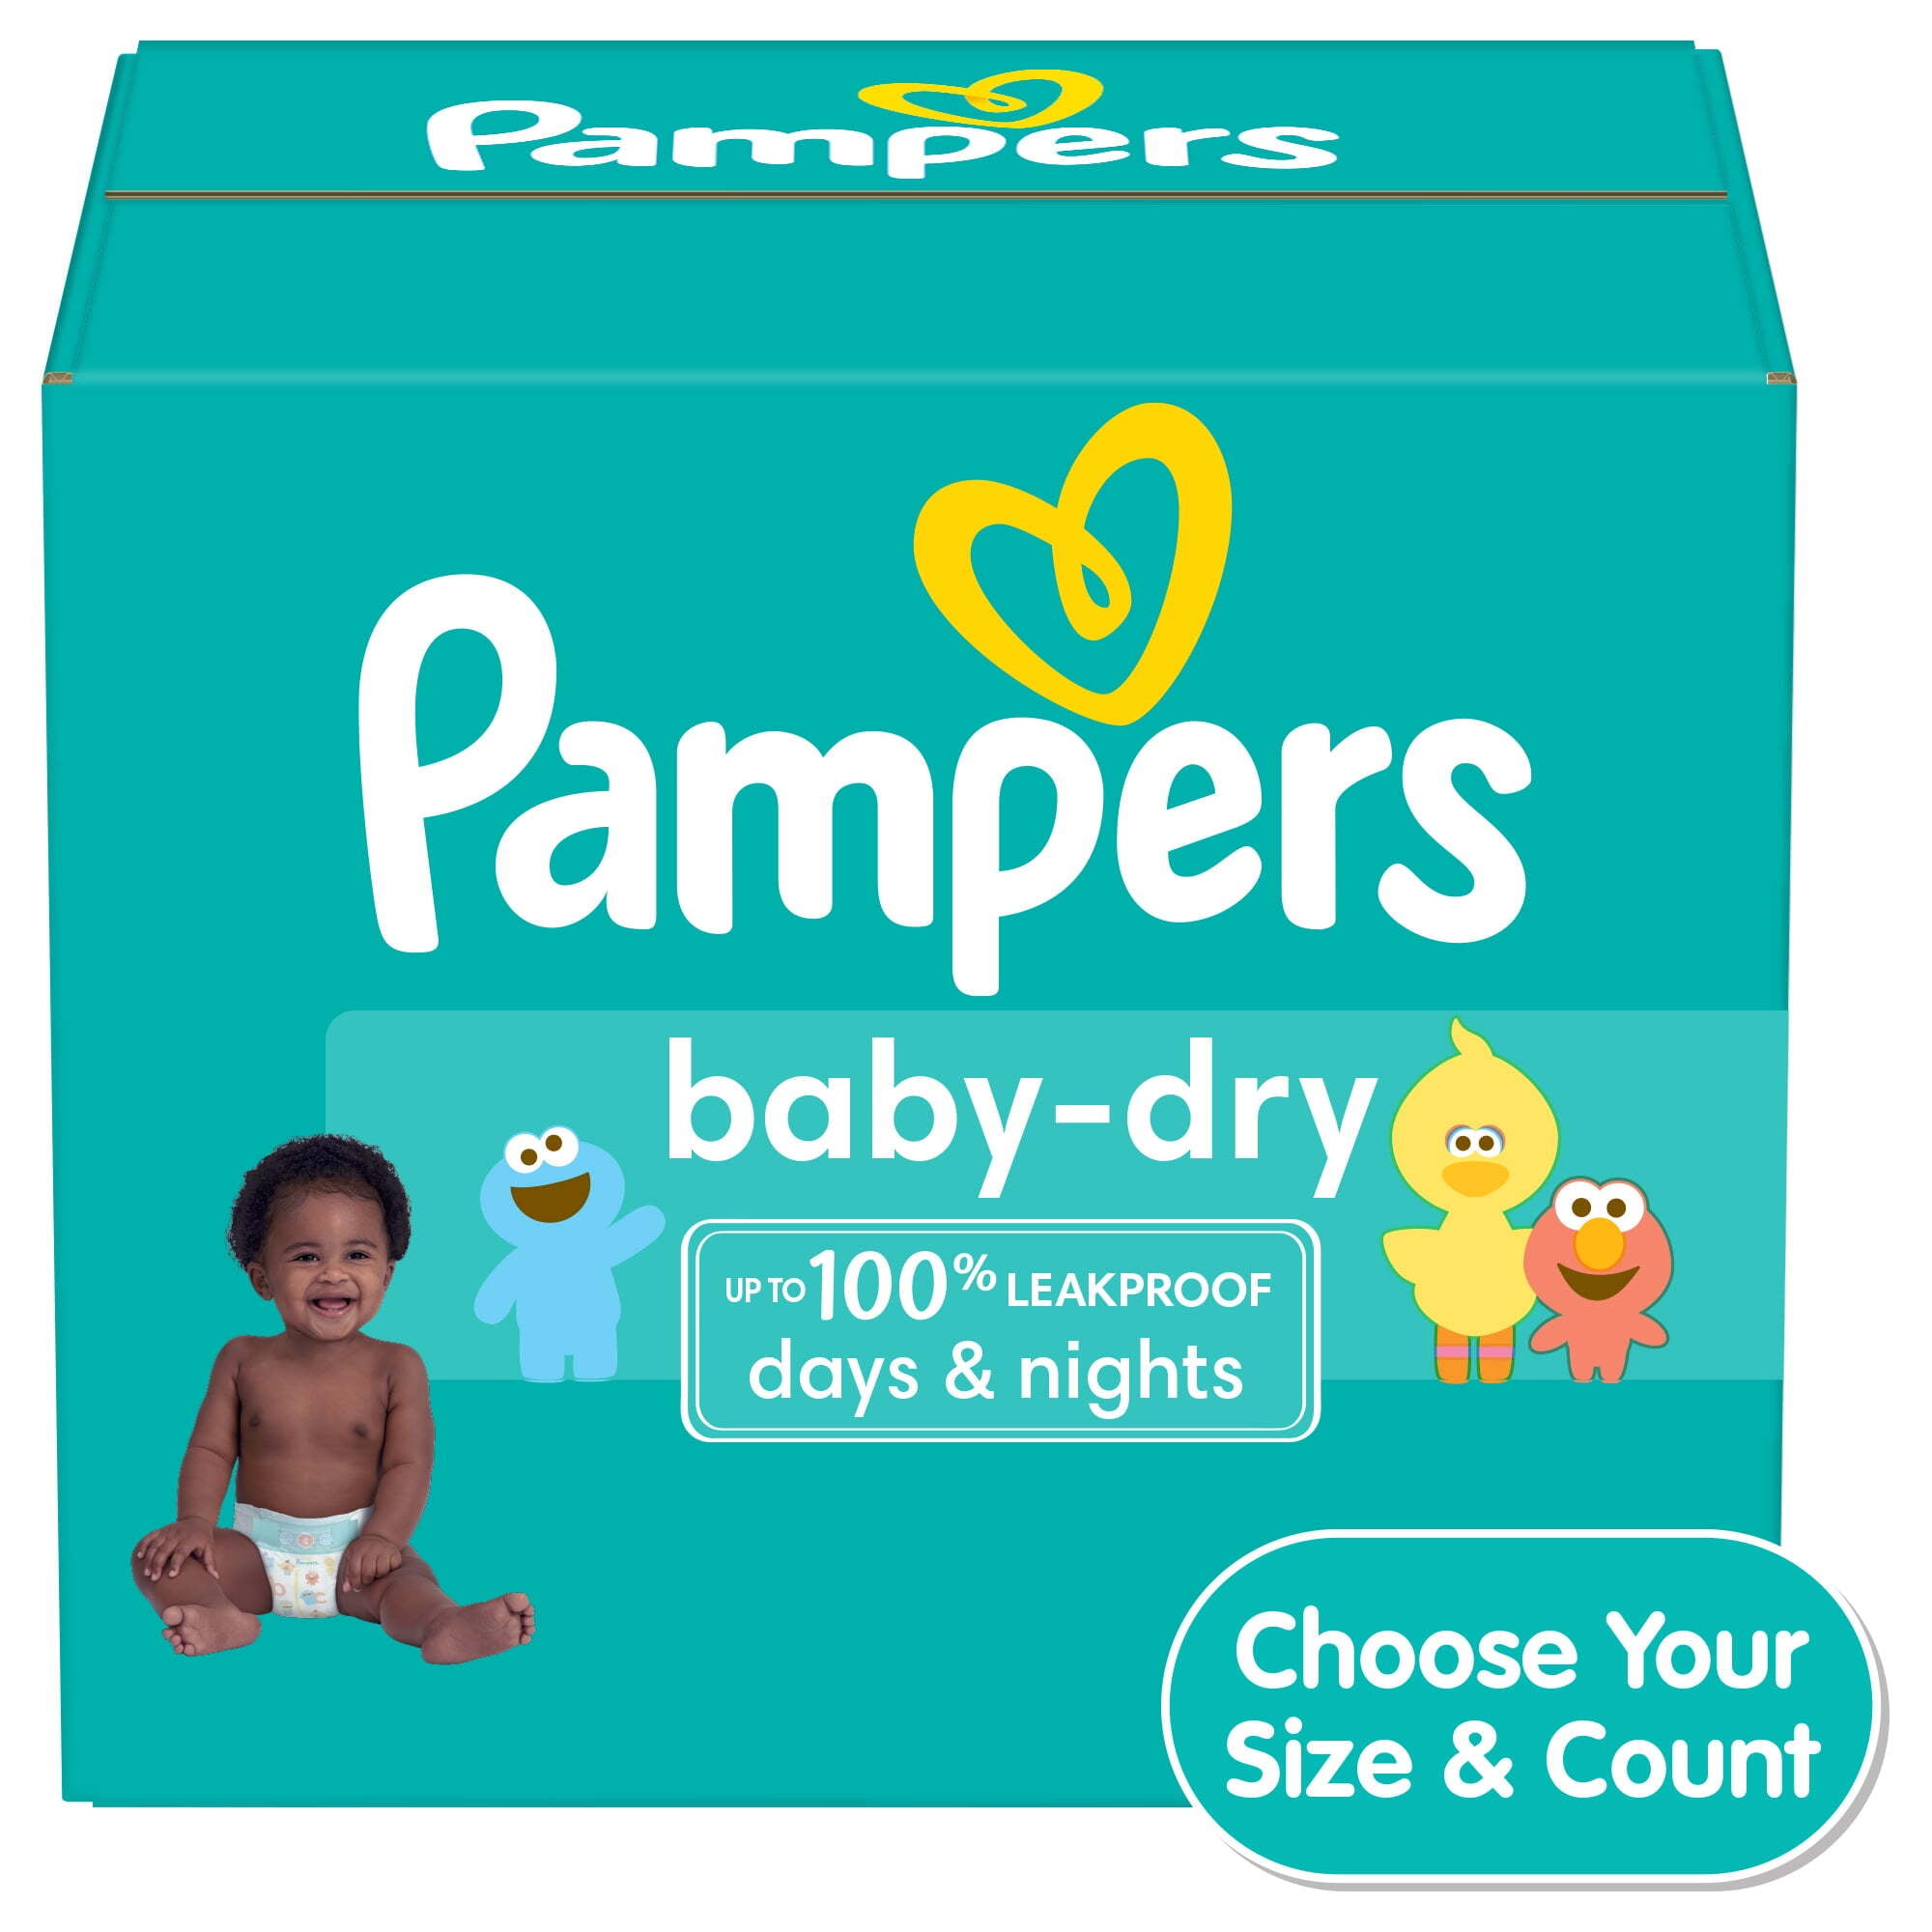 PAMPERS Baby-dry pants couches-culottes taille 5 (12-17kg) 37 couches pas  cher 